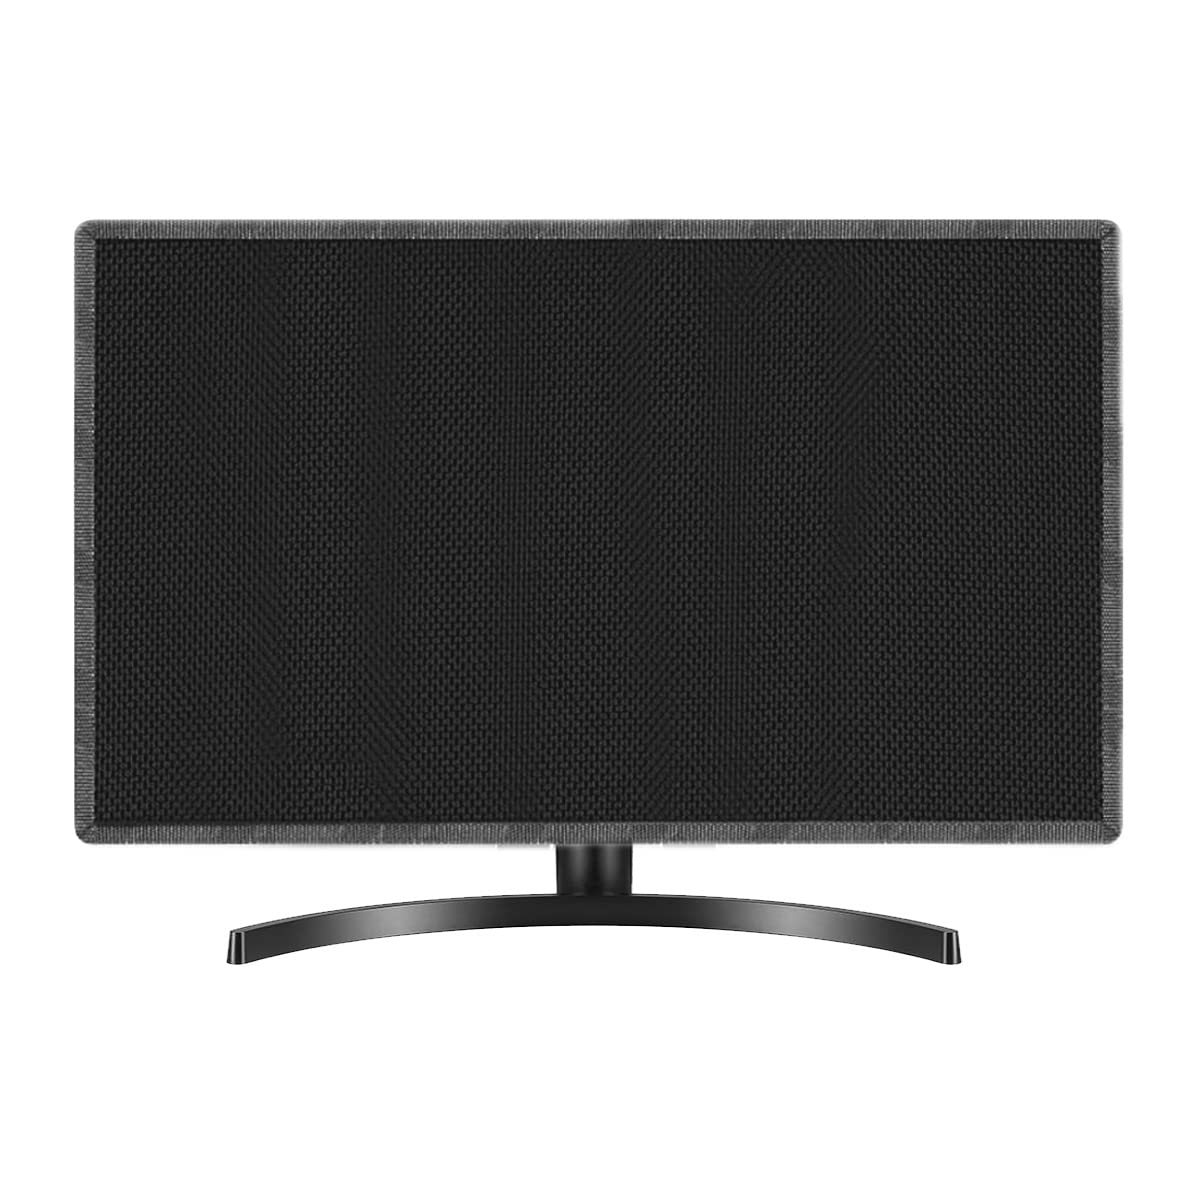 PalaP Super Premium Dust Proof Monitor Cover for BENQ 32 inches Monitor (Black)